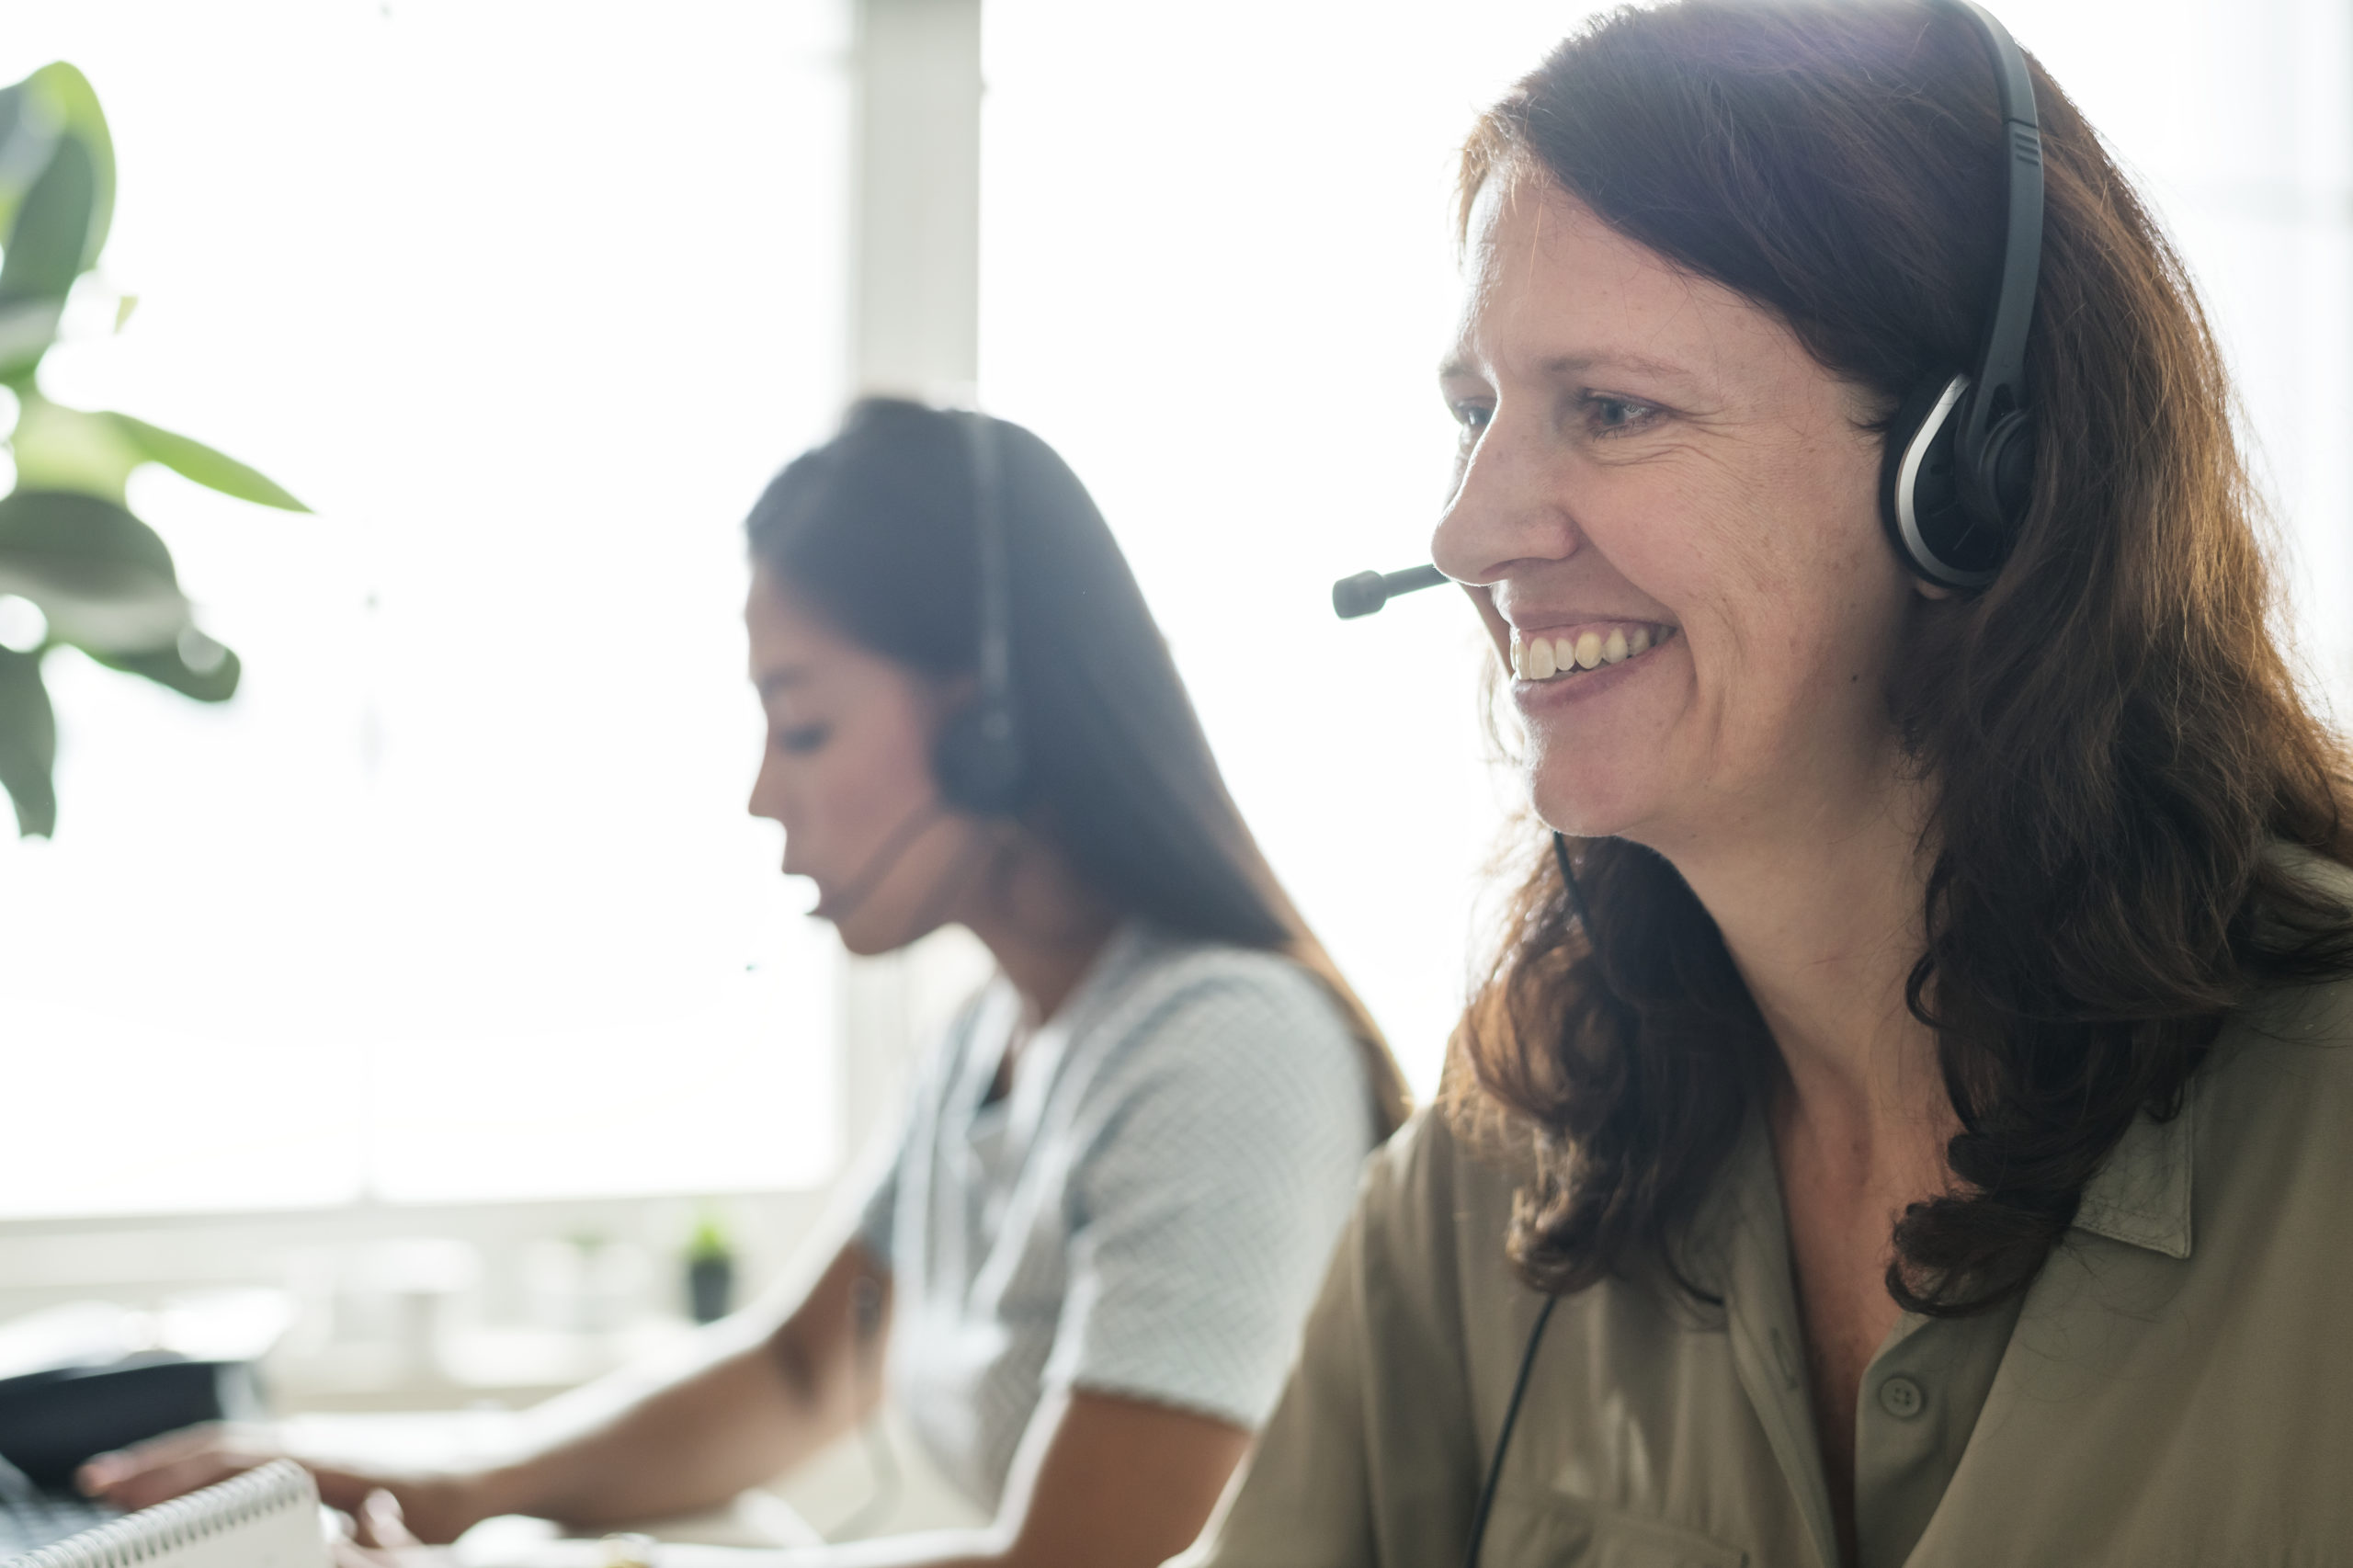 Contact Centers Reacted To COVID-19 Quite Well — It’s Now Time To Institutionalize The Best Practices